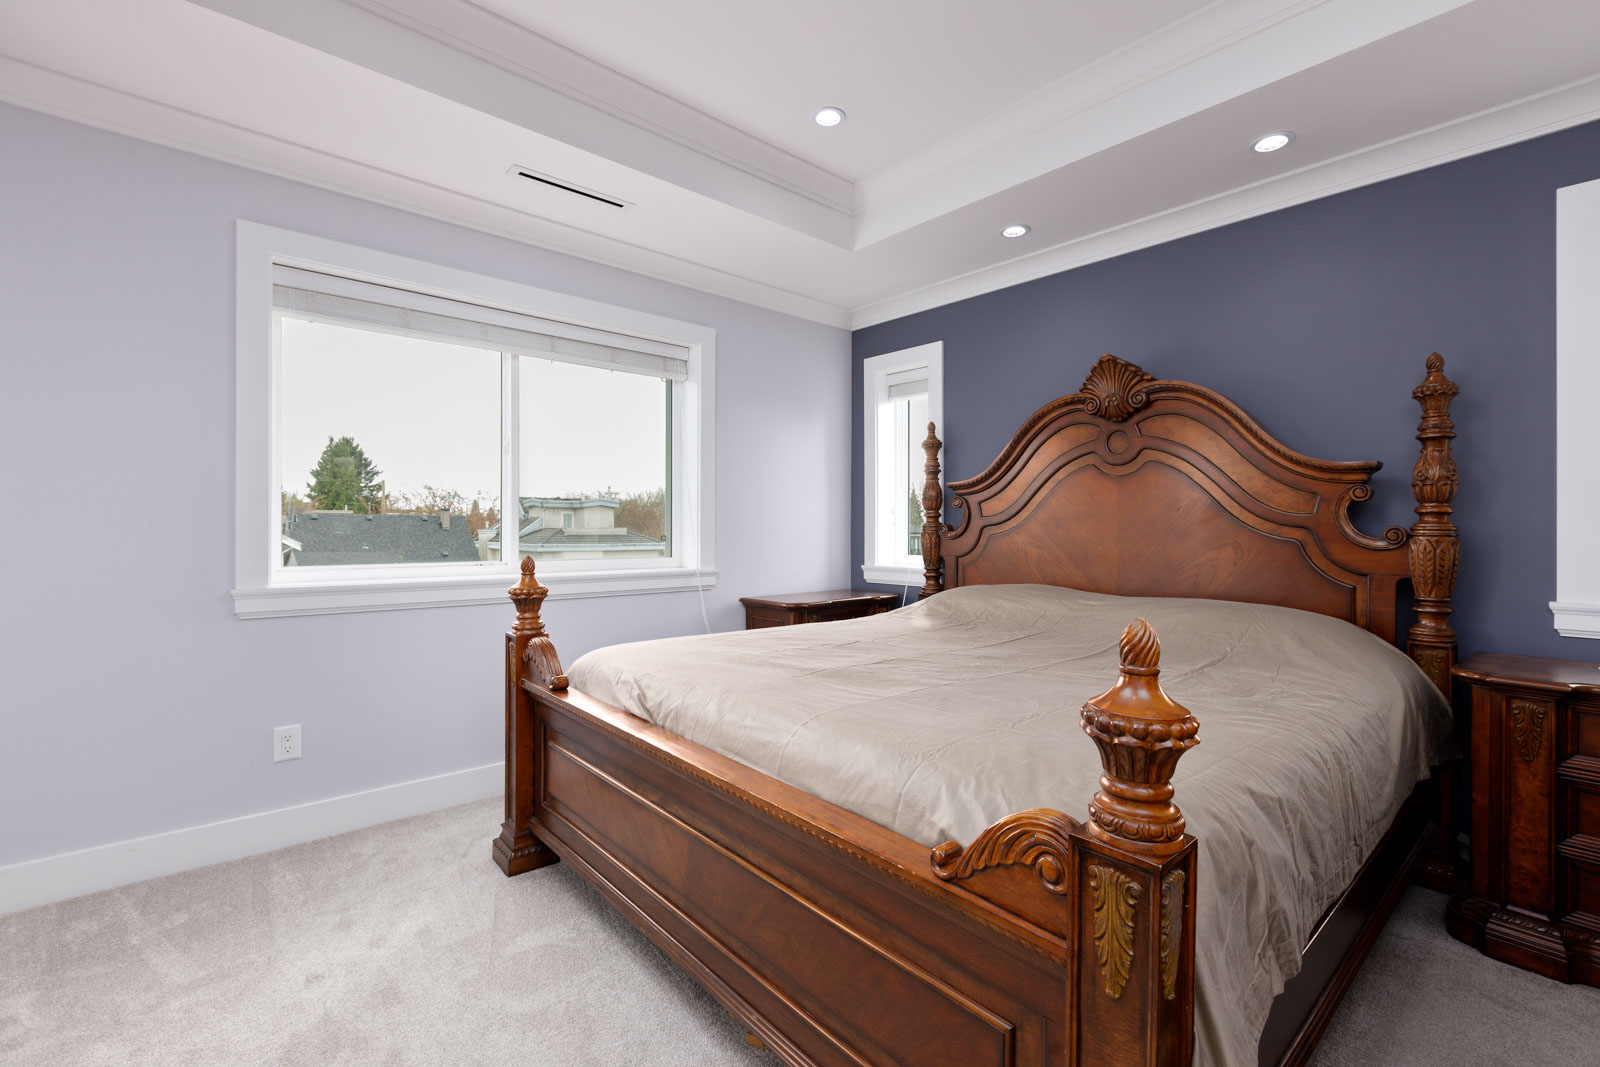 bedroom with two toned walls and pot lights in ceiling. 3 windows